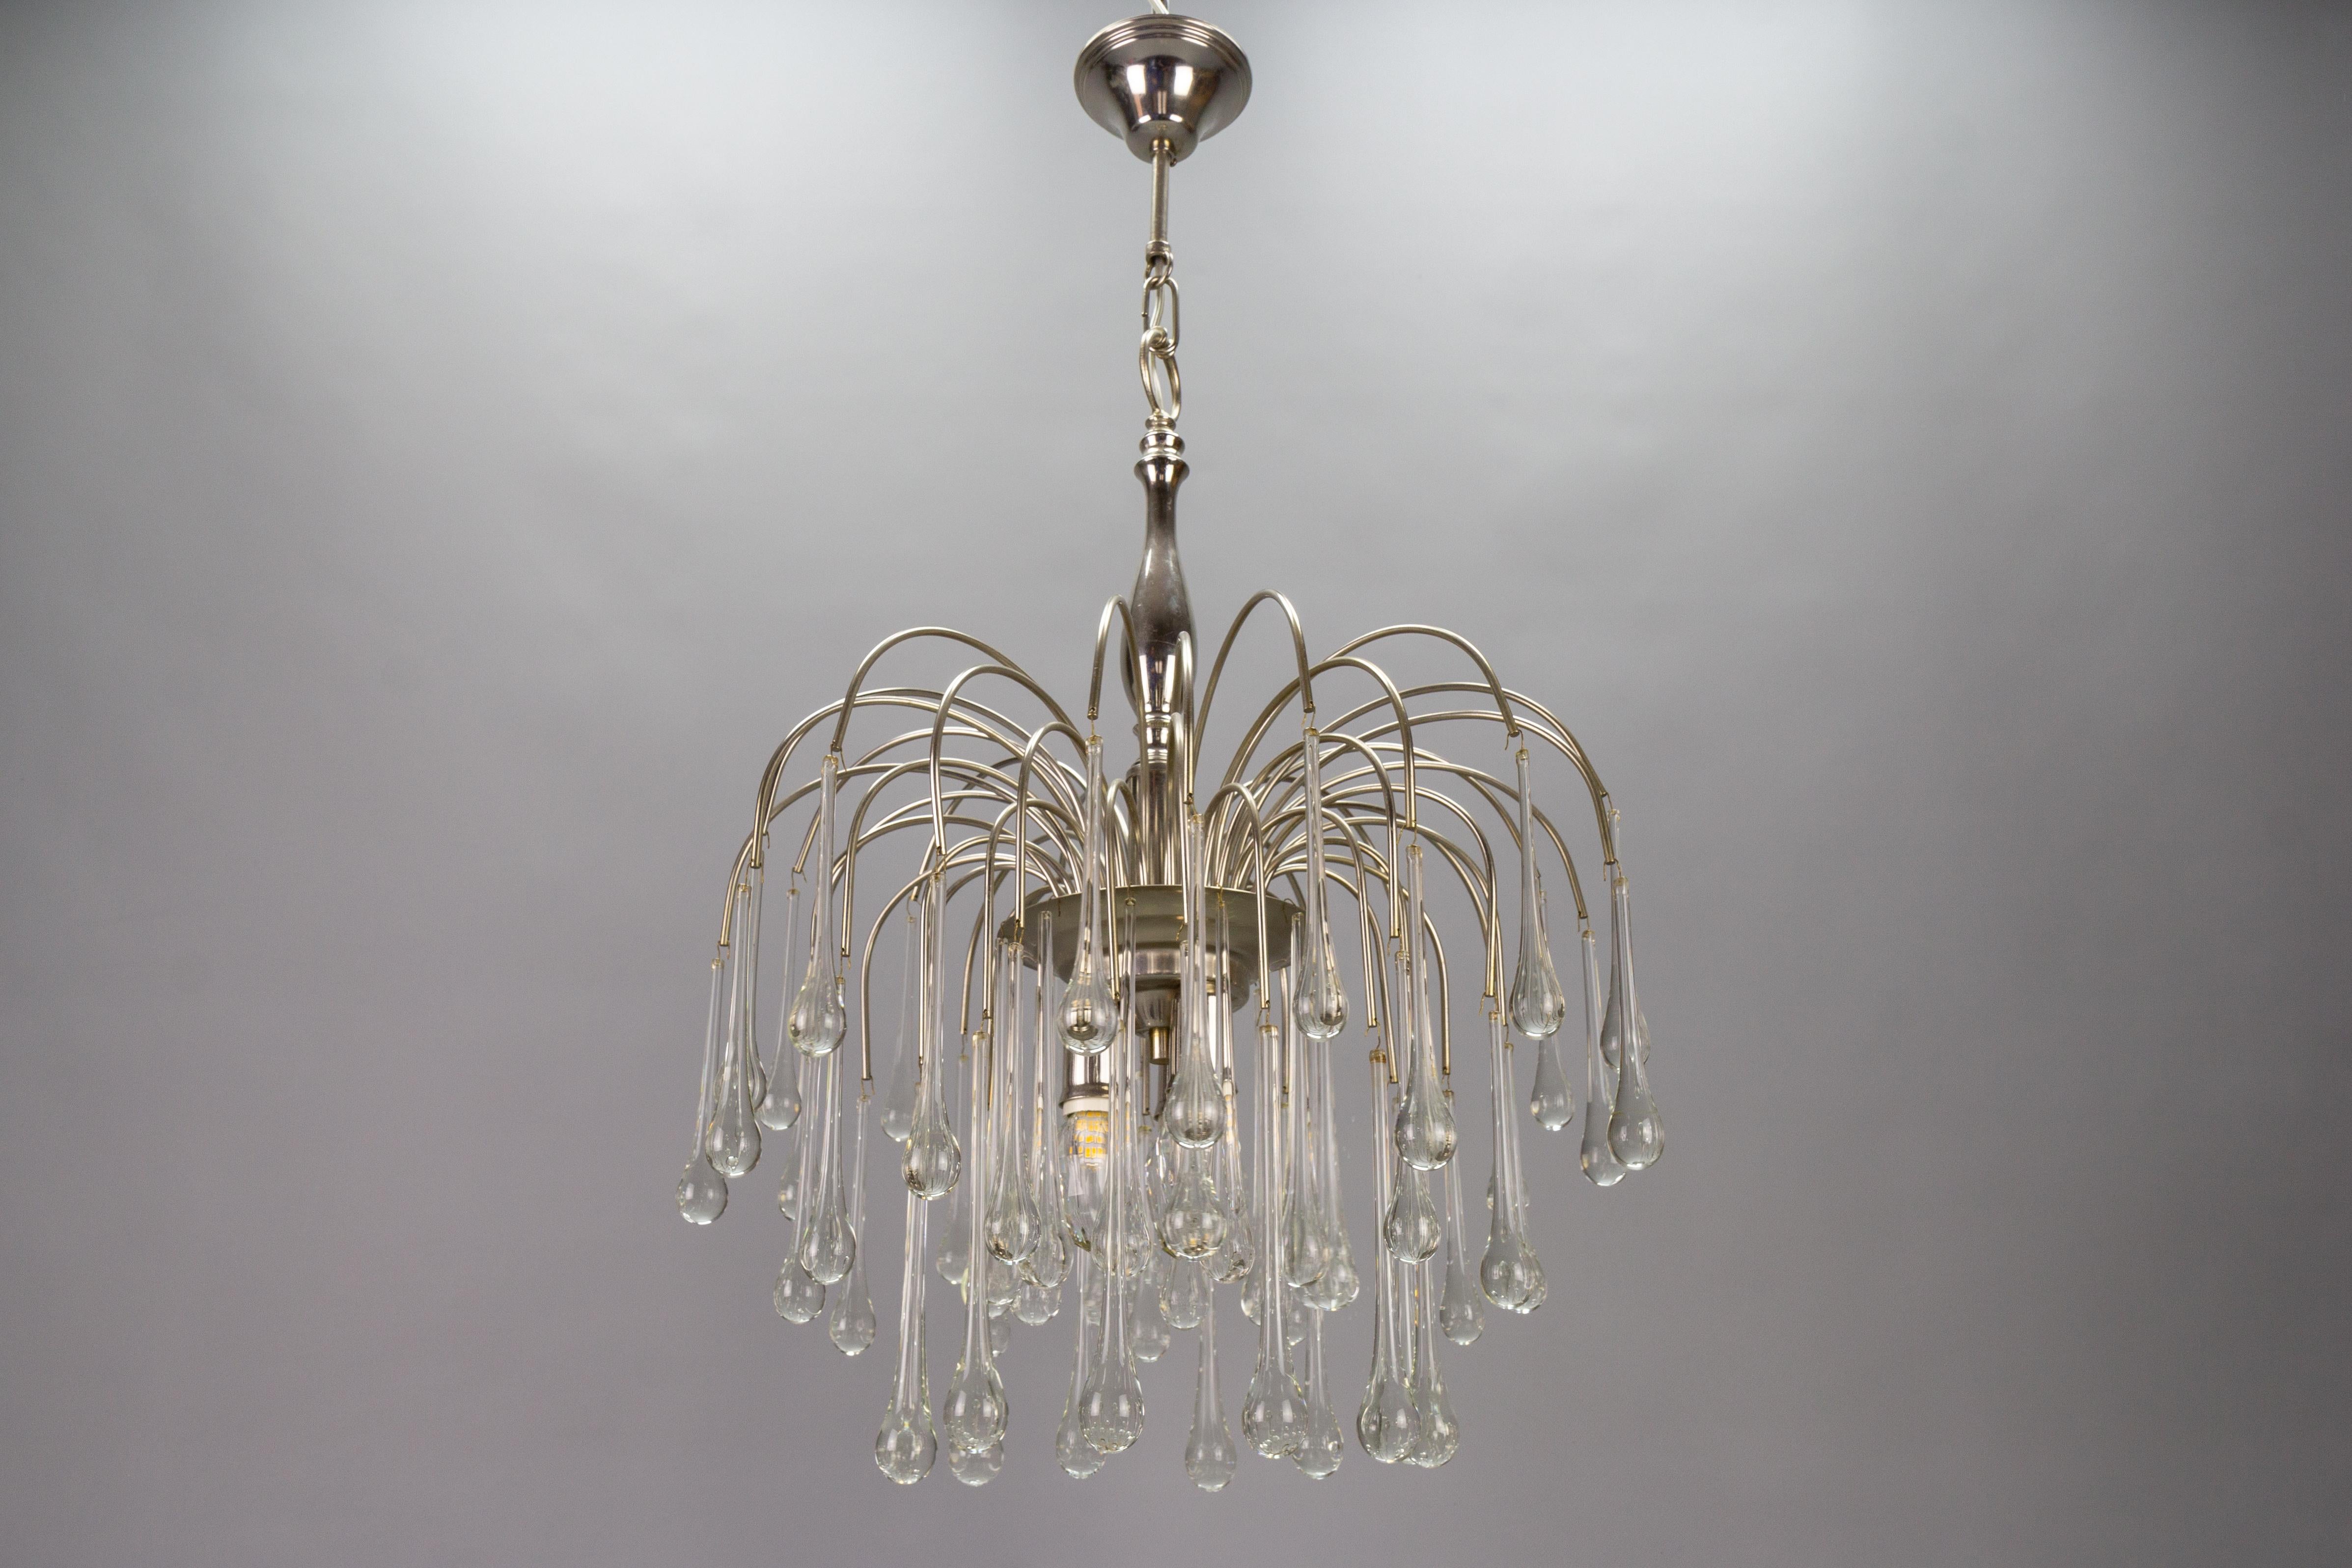 Italian clear Murano glass and chromed brass three-light waterfall chandelier, circa the 1970s.
This beautiful ceiling light fixture features a chromed brass frame and clear Murano crystal glass drops.
The height can be lengthened by 37 cm / 14.56